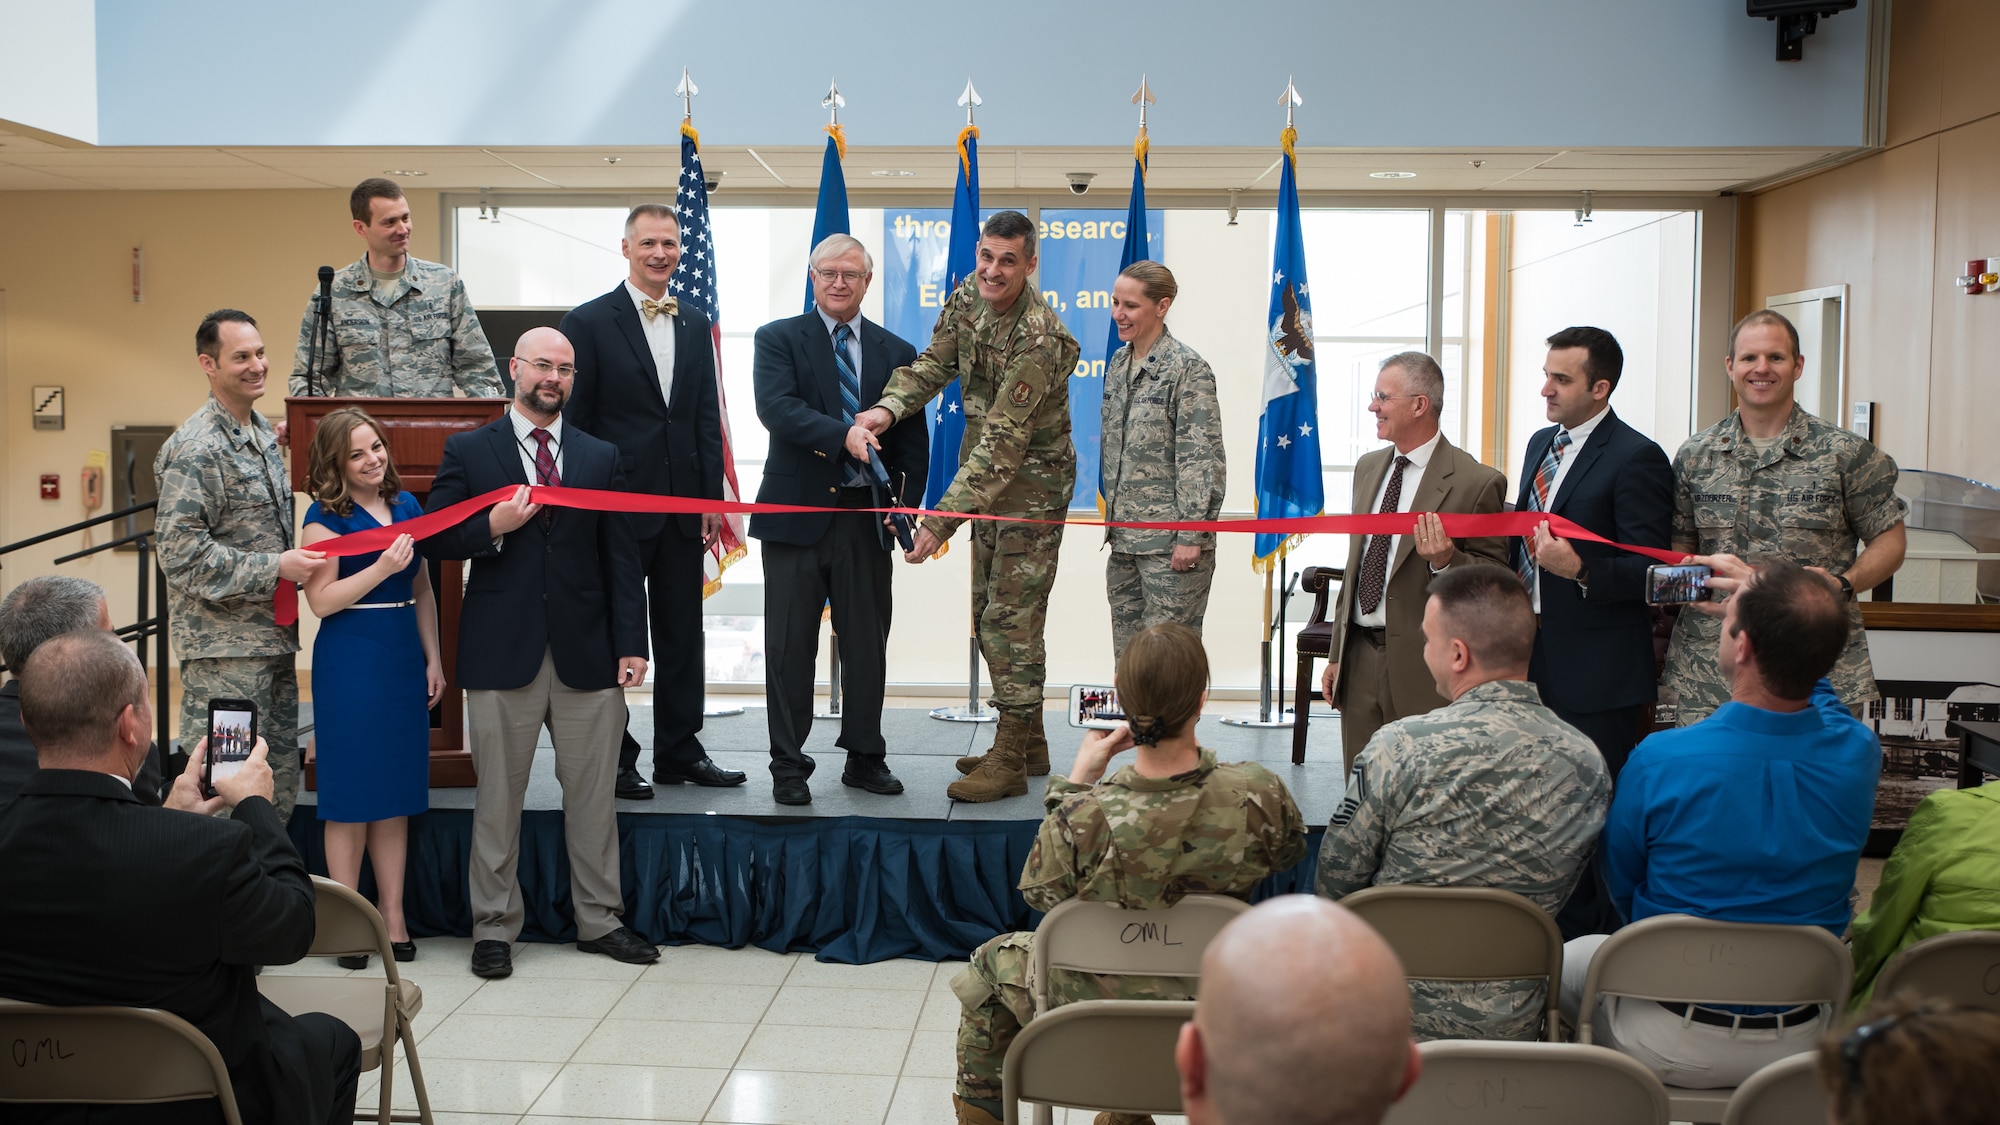 Jack Blackhurst, executive director of the Air Force Research Laboratory, and Brig. Gen. Mark Koeniger, commander of the 711th Human Performance Wing, prepare to cut a ceremonial red ribbon in honor of the activation of the Warfighter Medical Optimization Division, one of five divisions comprising the 711HPW’s Airman Systems Directorate. The activation ceremony was held May 1 at the United States Air Force School of Aerospace Medicine. (U.S. Air Force photo/Rick Eldridge)